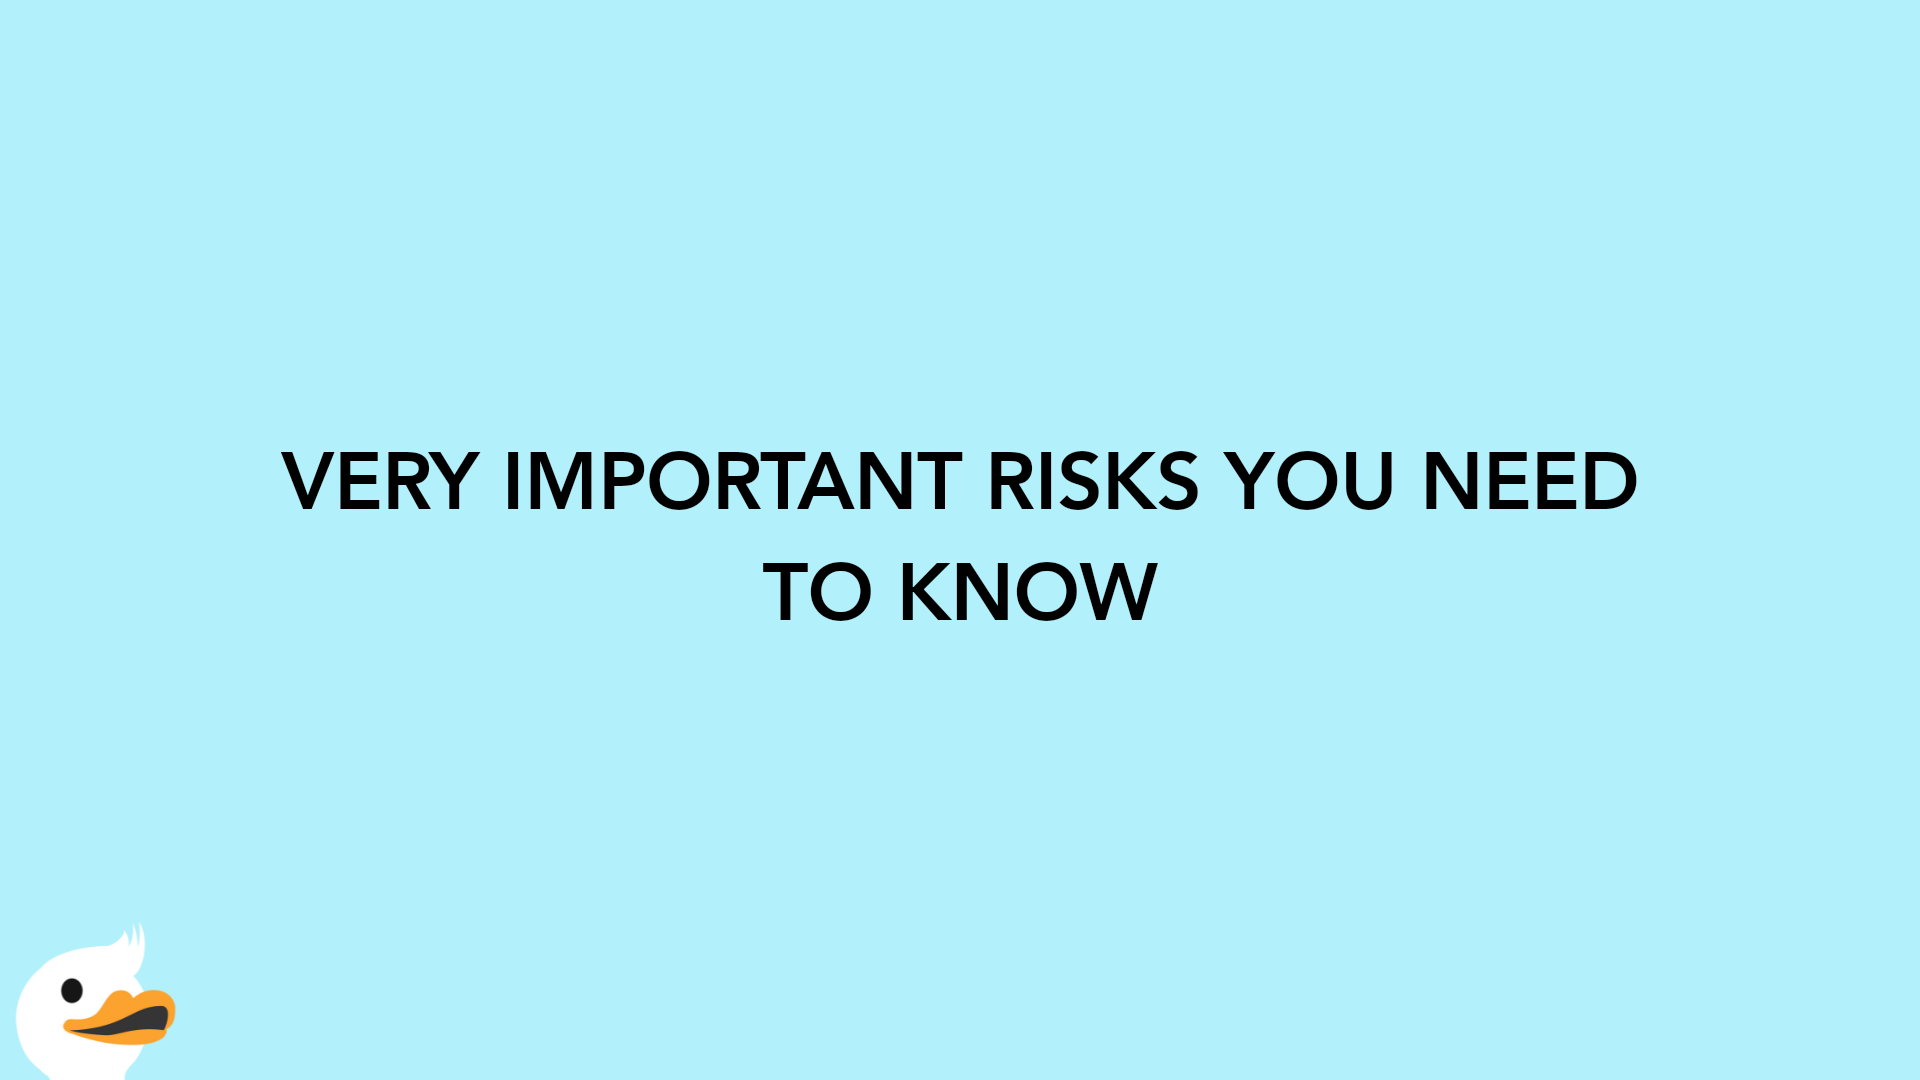 VERY IMPORTANT RISKS YOU NEED TO KNOW